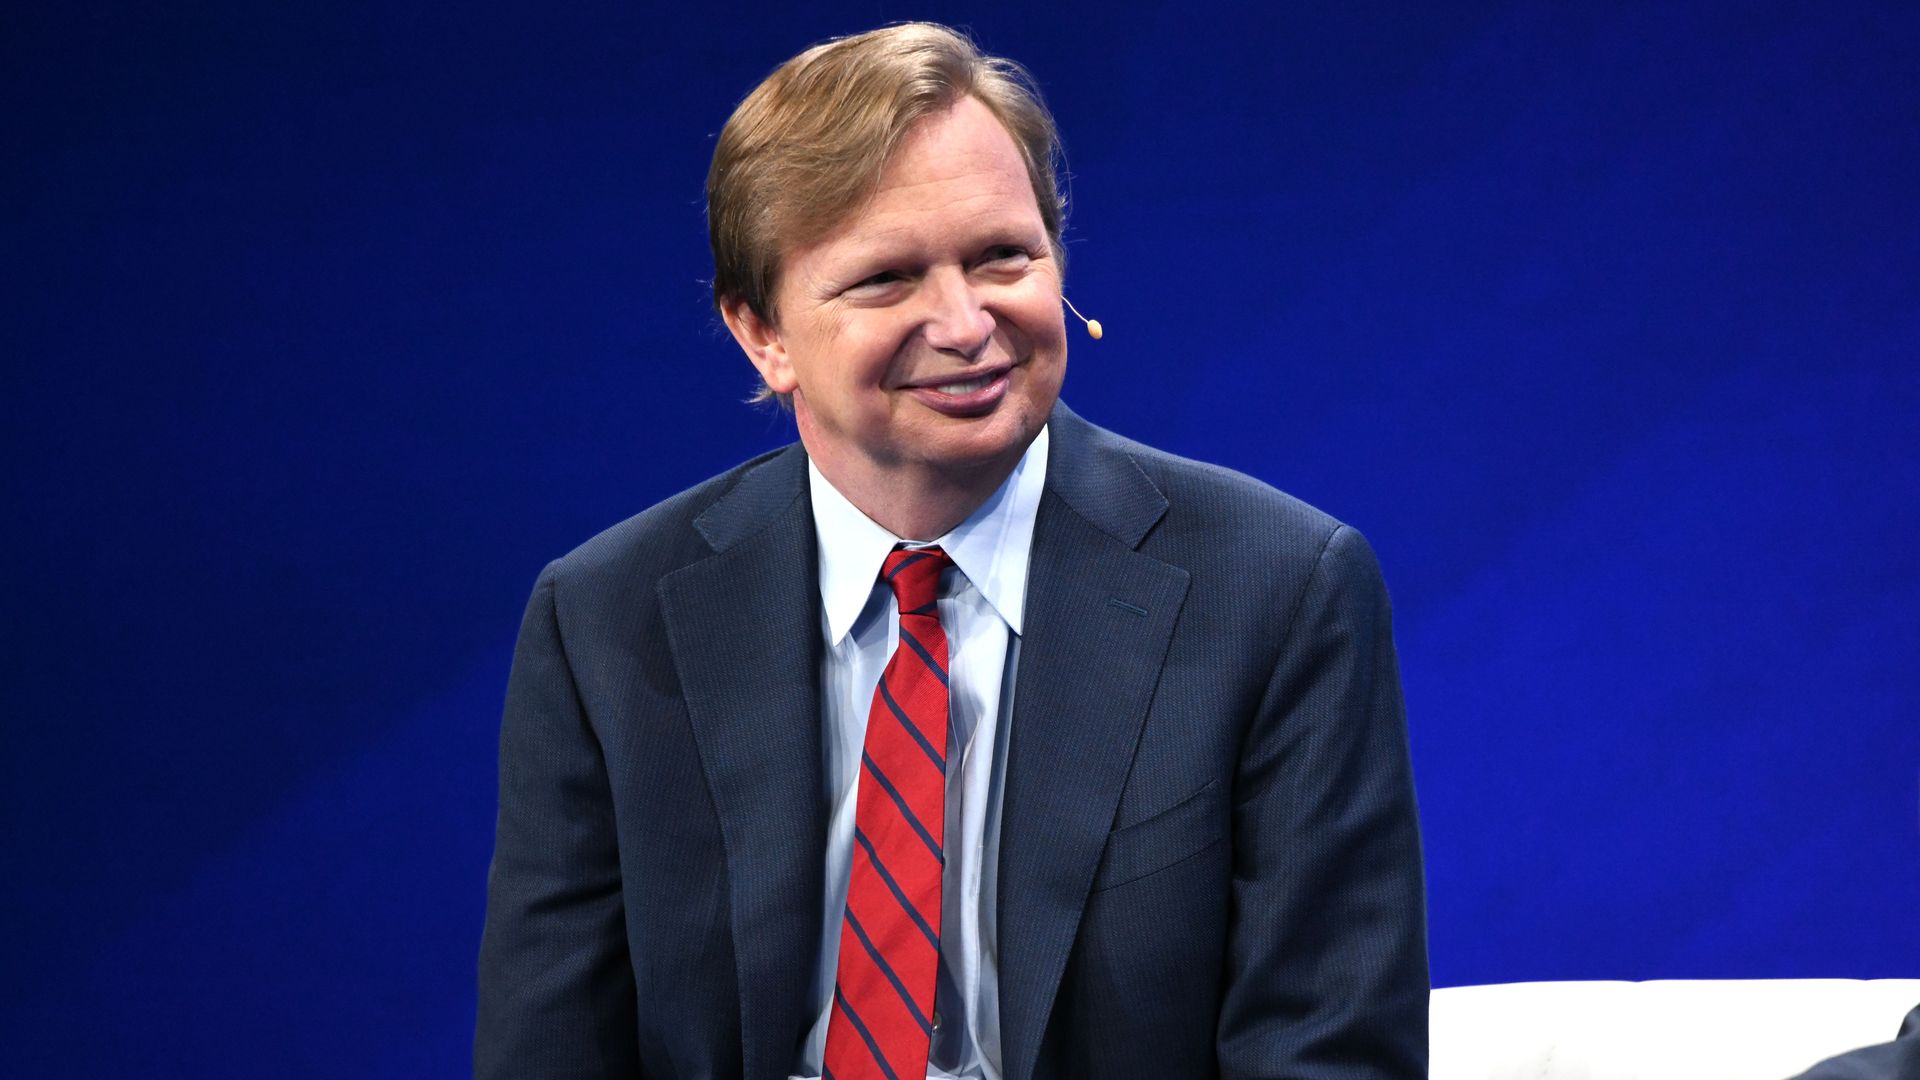 Former Obama aide Jim Messina is seen smiling while speaking on stage.